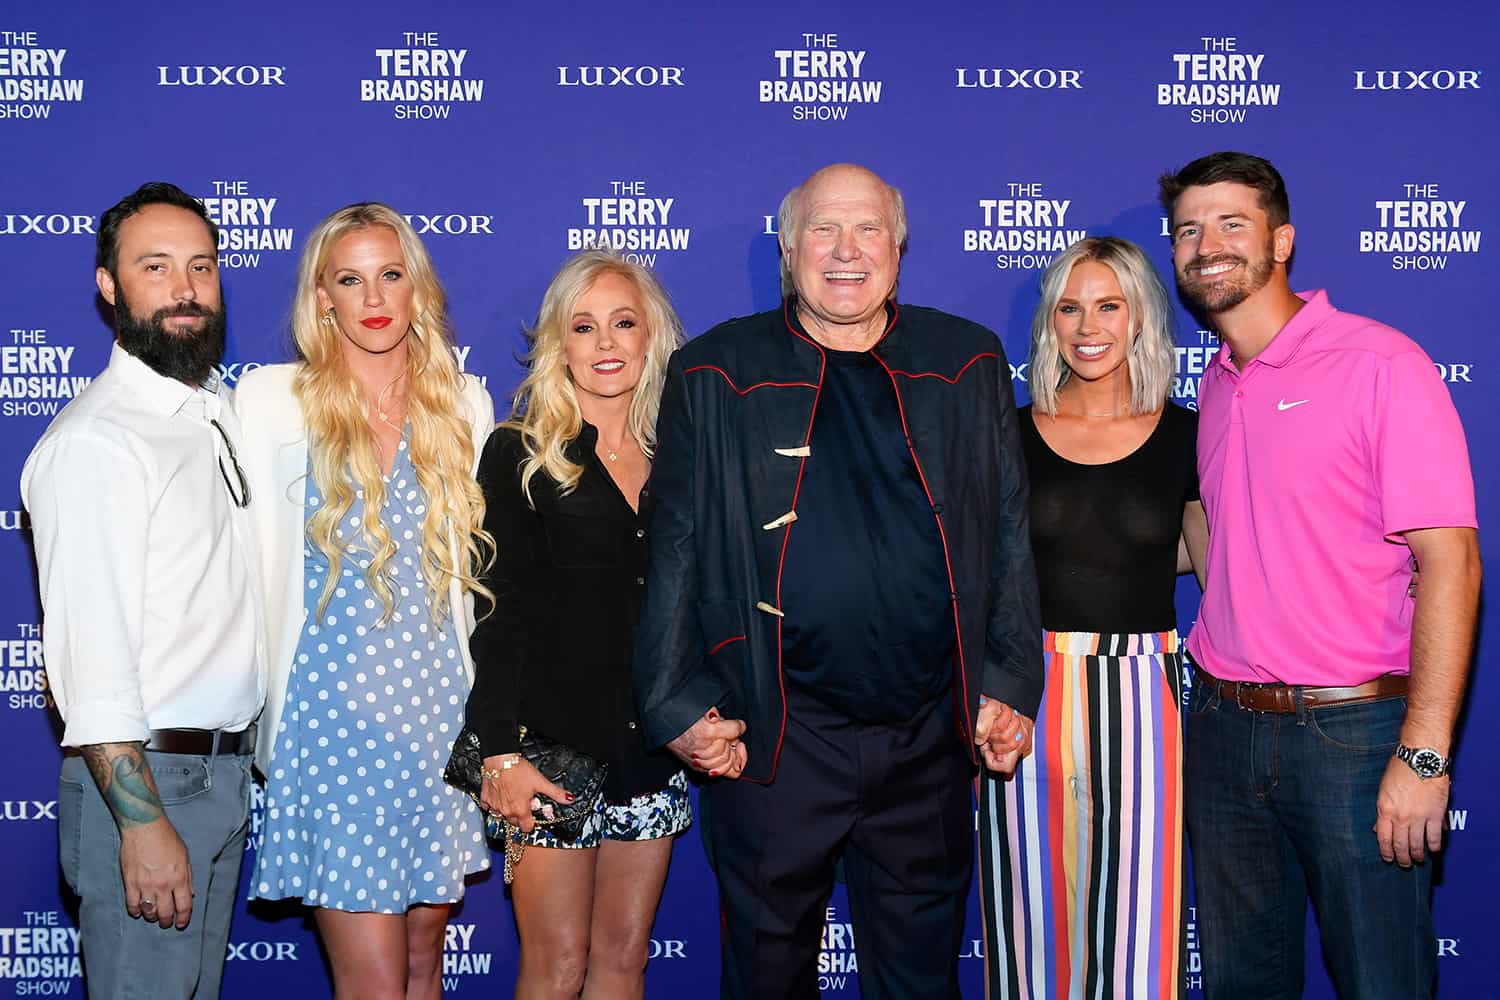 The Terry Bradshaw Show Premieres at Luxor Hotel and Casino in Las Vegas.